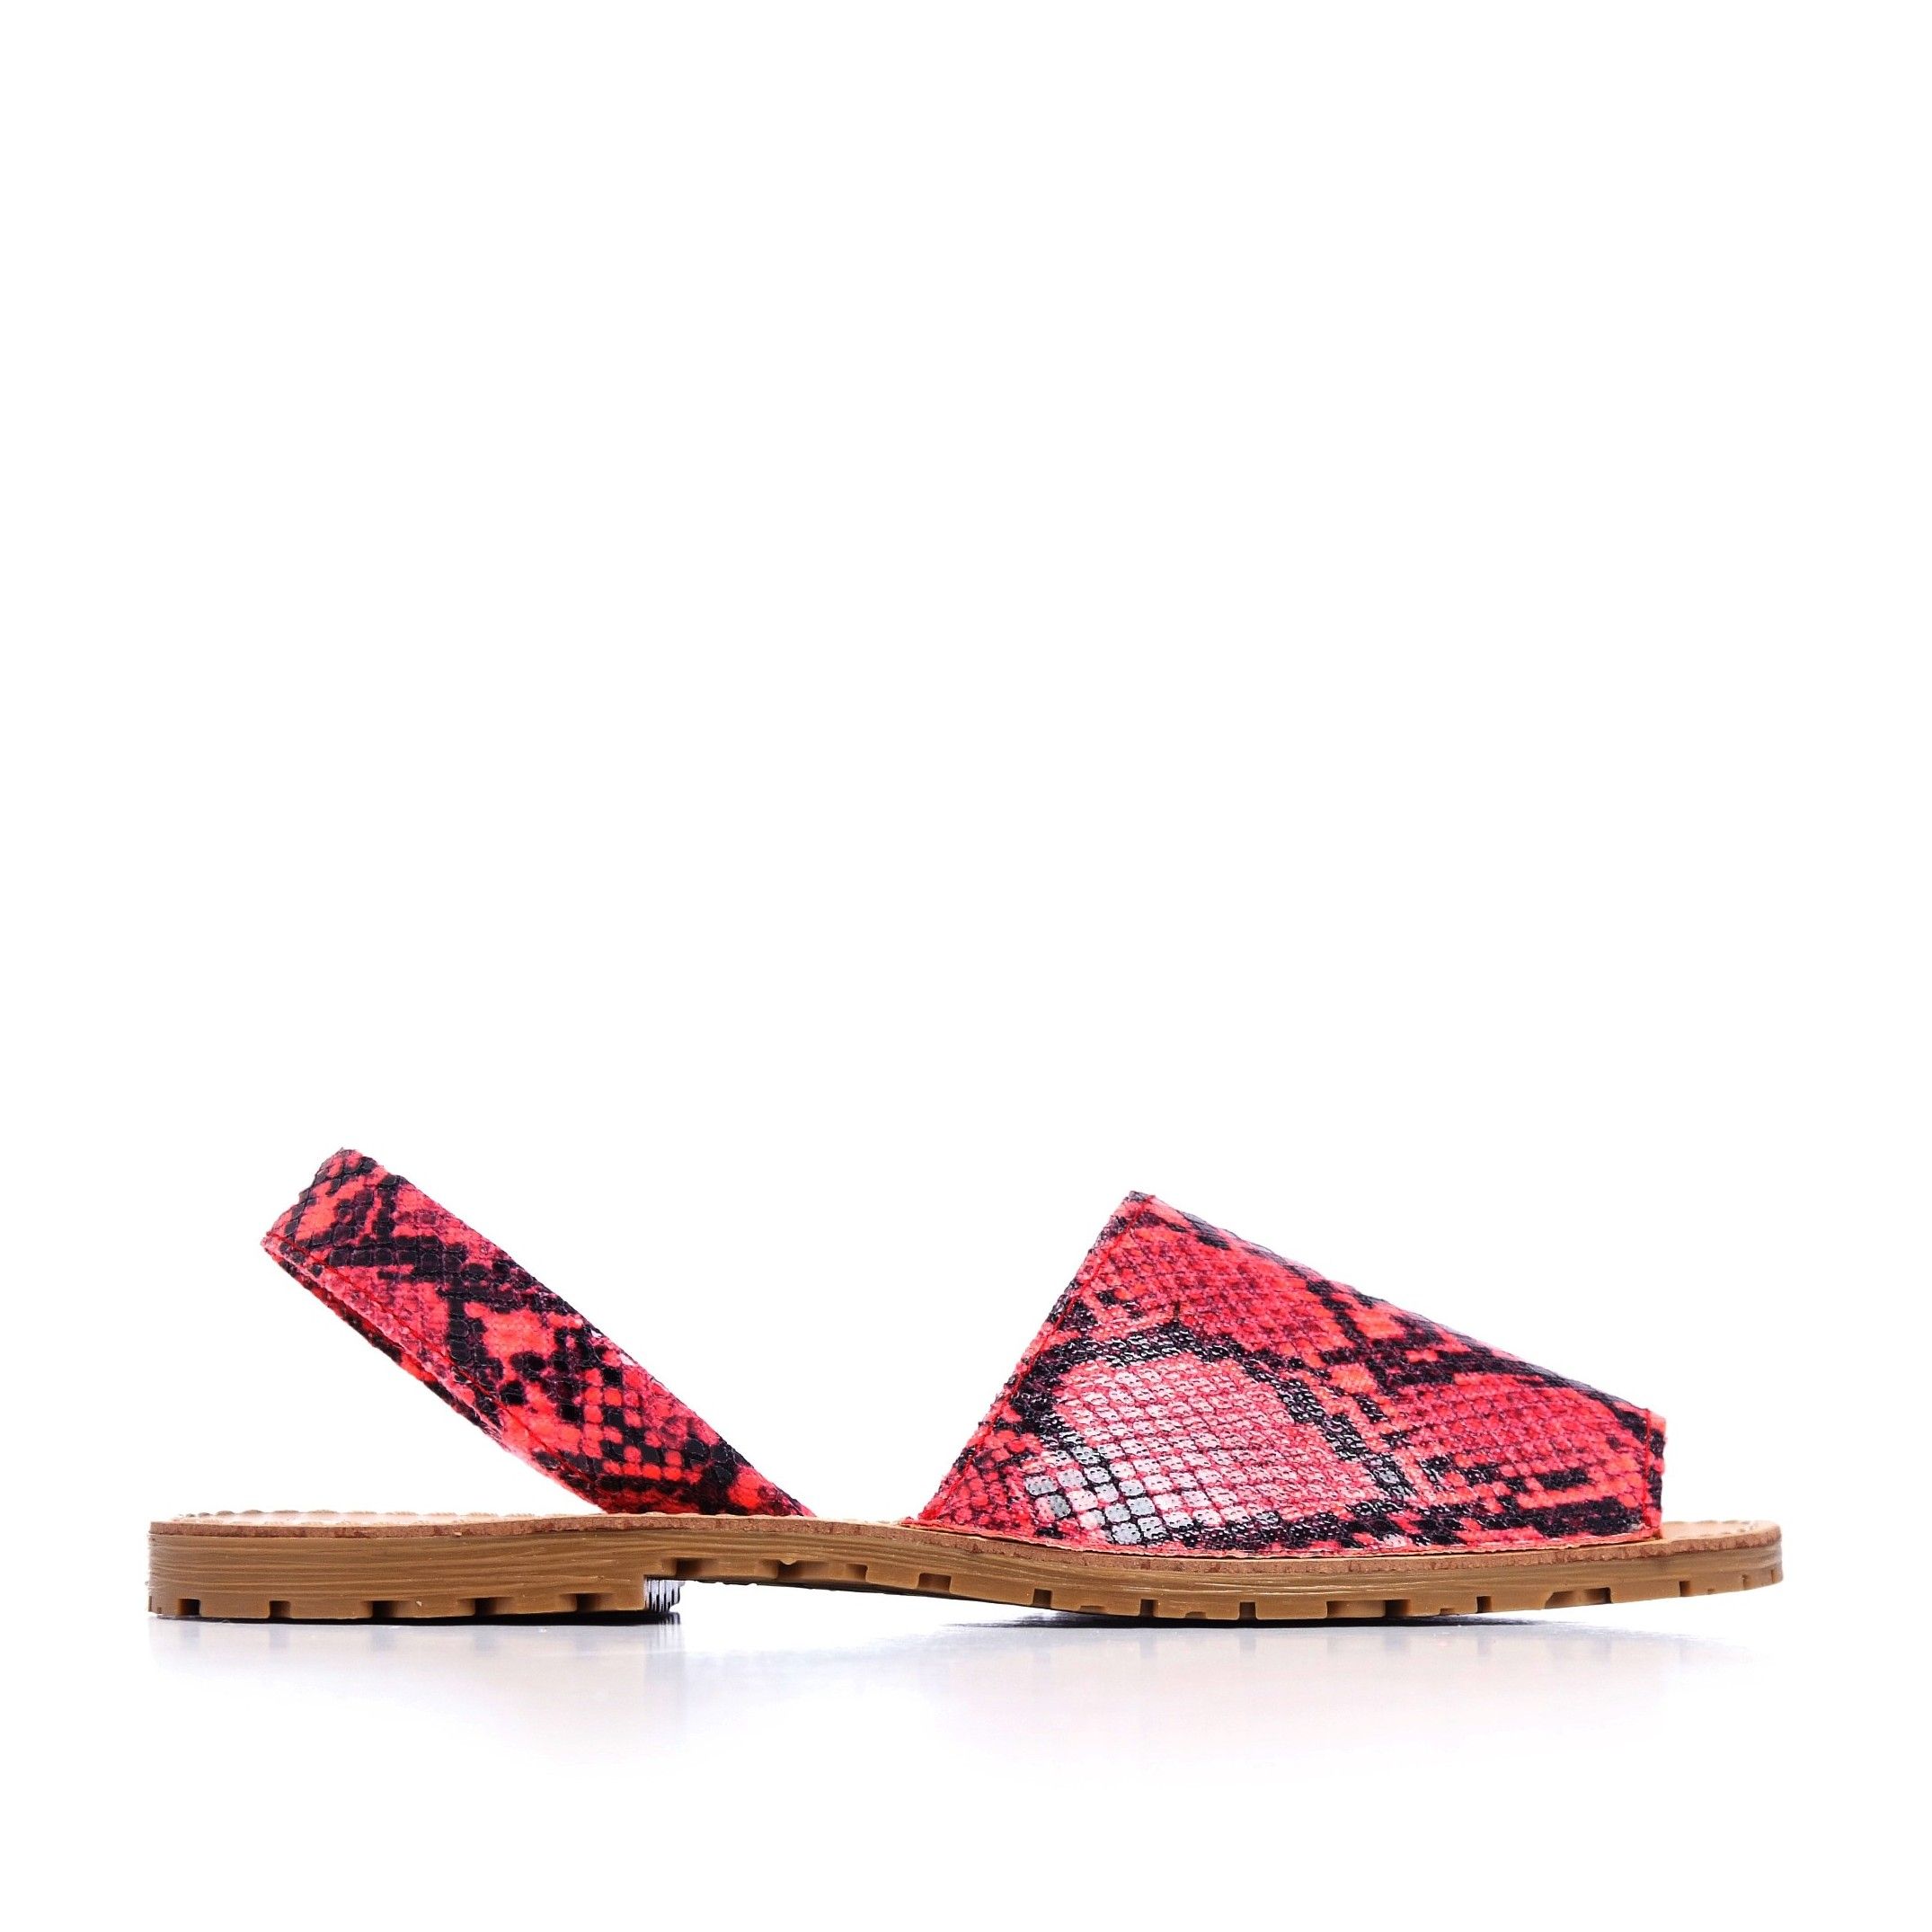 Classic leather sandal Menorquina in fluor snake. Upper and inner: leather. Sole: anti-slip rubber. MADE IN SPAIN